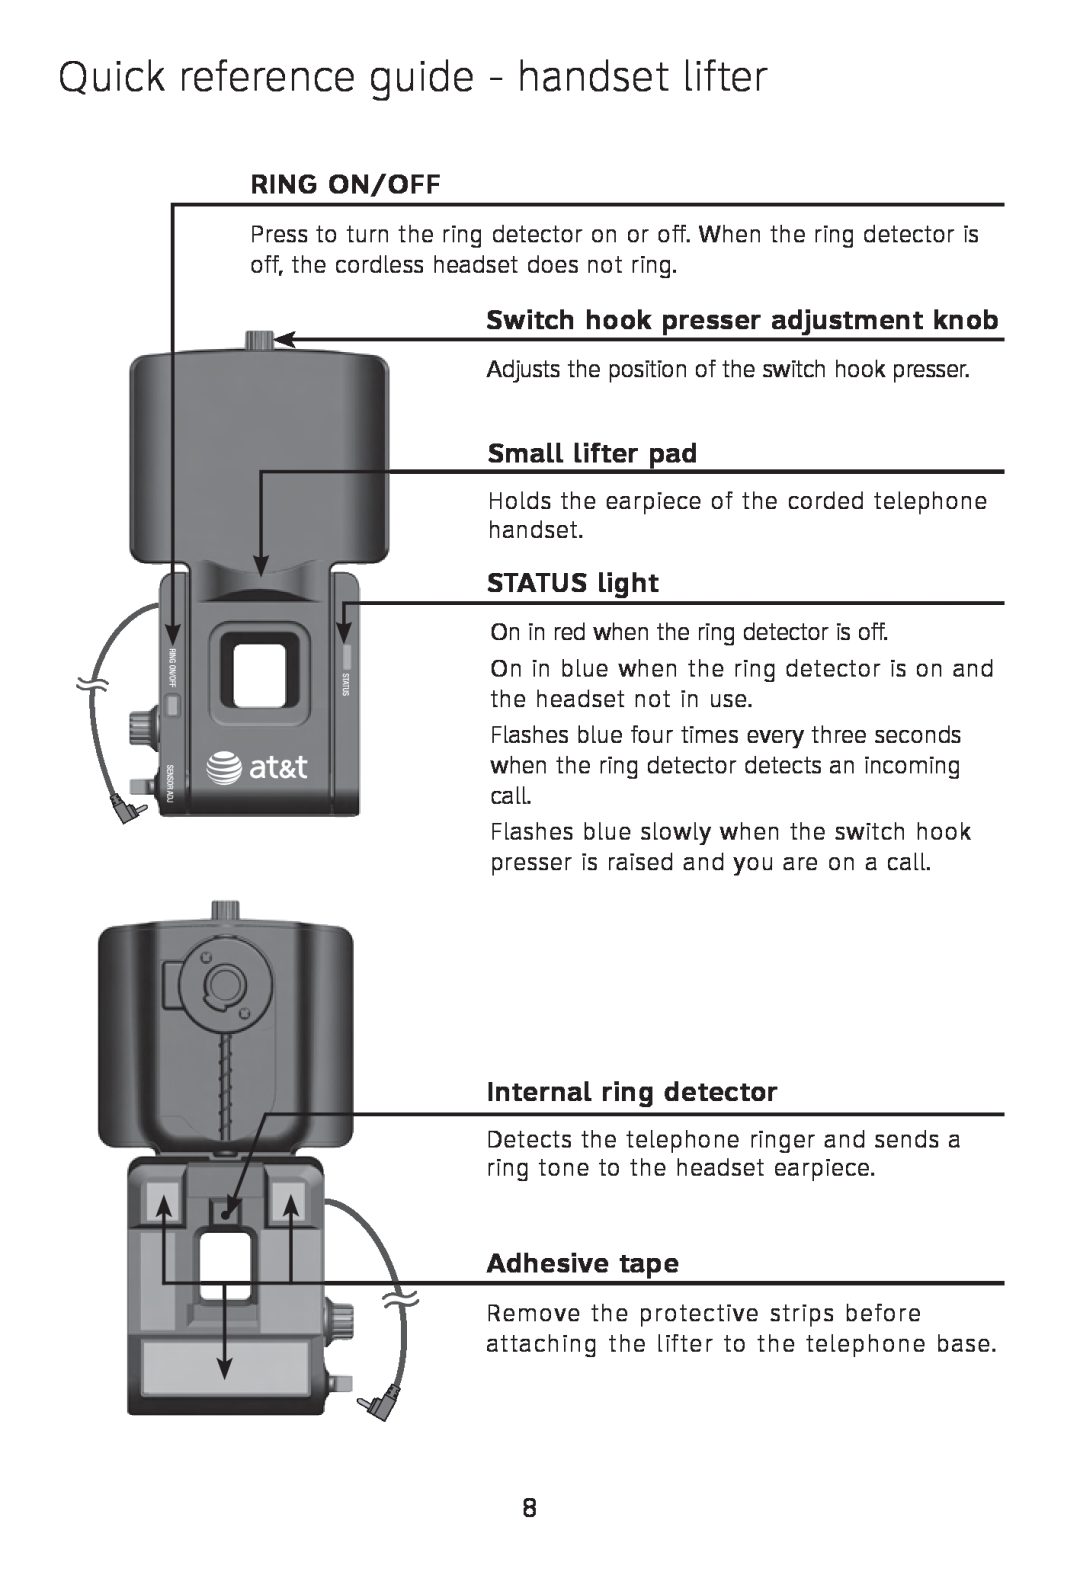 AT&T TL7612 Quick reference guide - handset lifter, Ring On/Off, Switch hook presser adjustment knob, Small lifter pad 